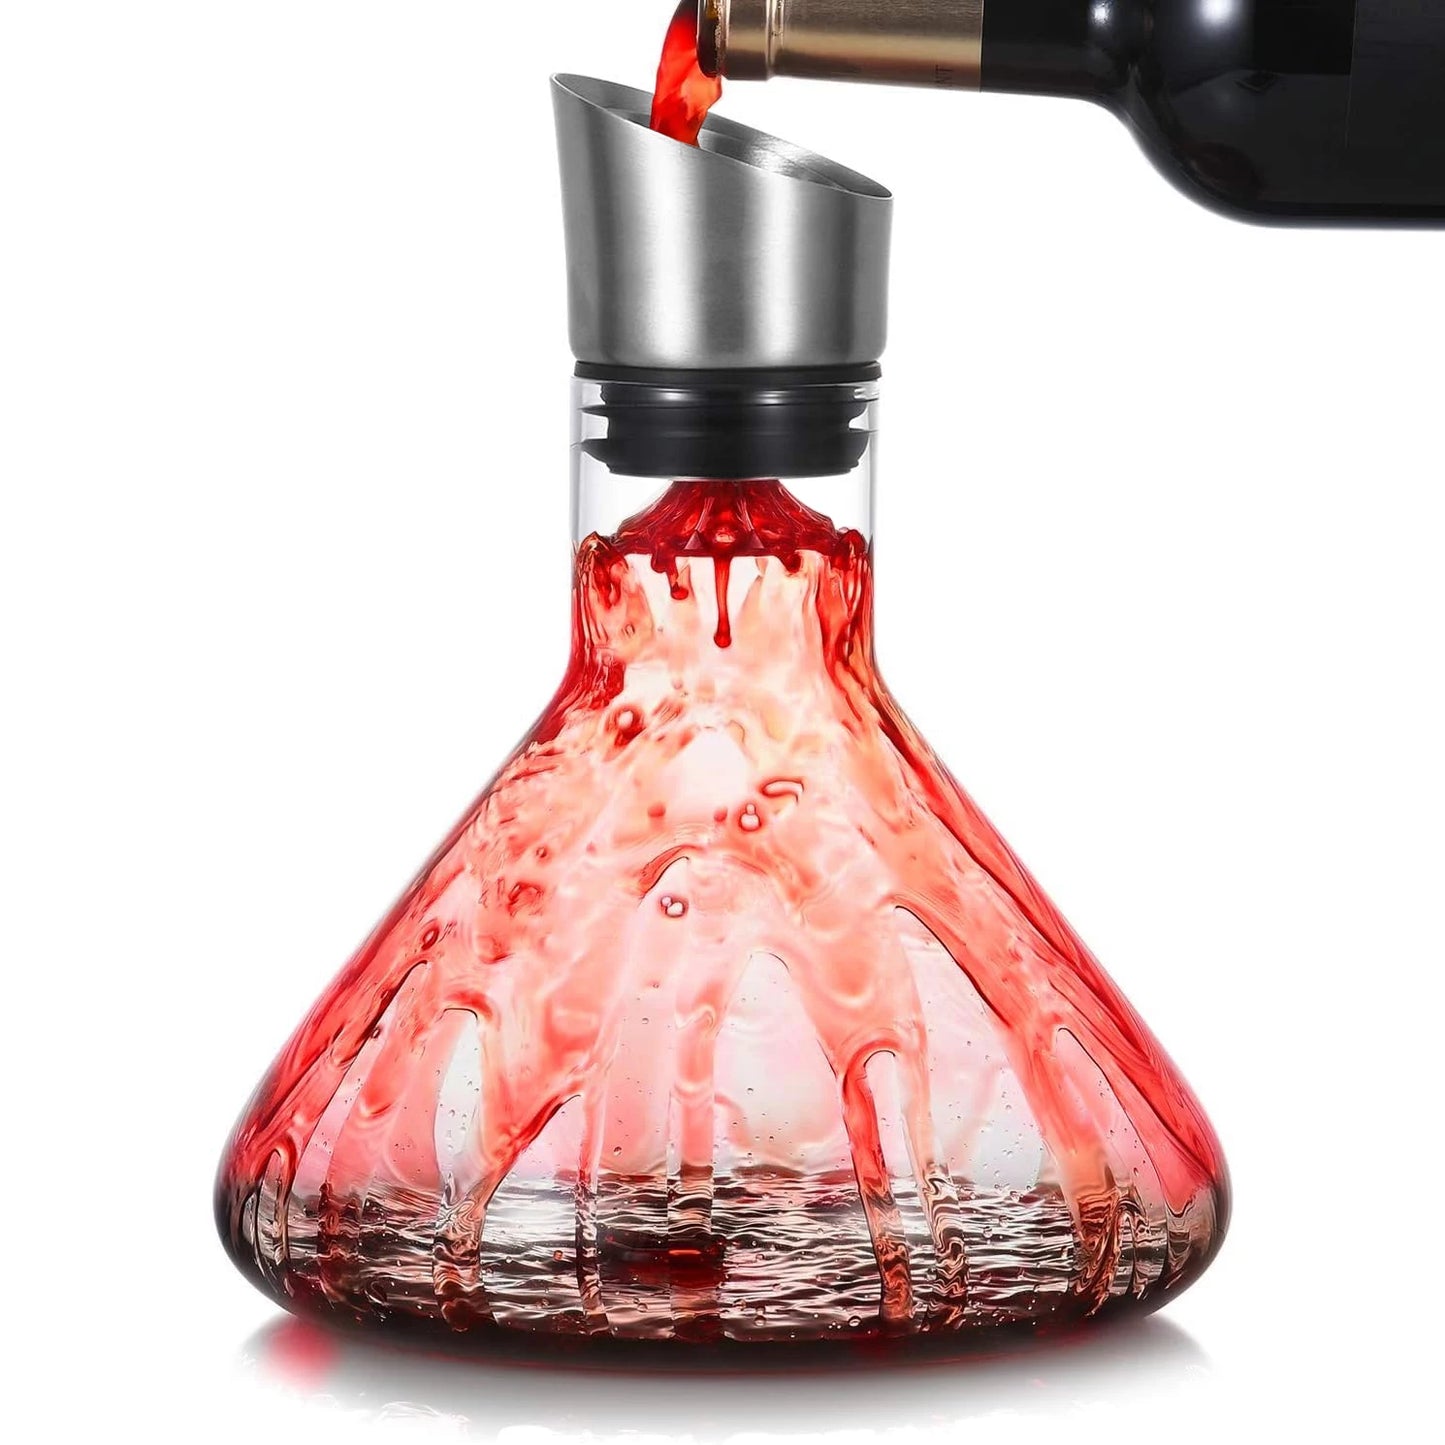 Wine Decanter Built-In Aerator Pourer Wine Carafe Red Wine Decanter Hand-Blown Crystal Glass Wine Accessories Decanters (1500ML)